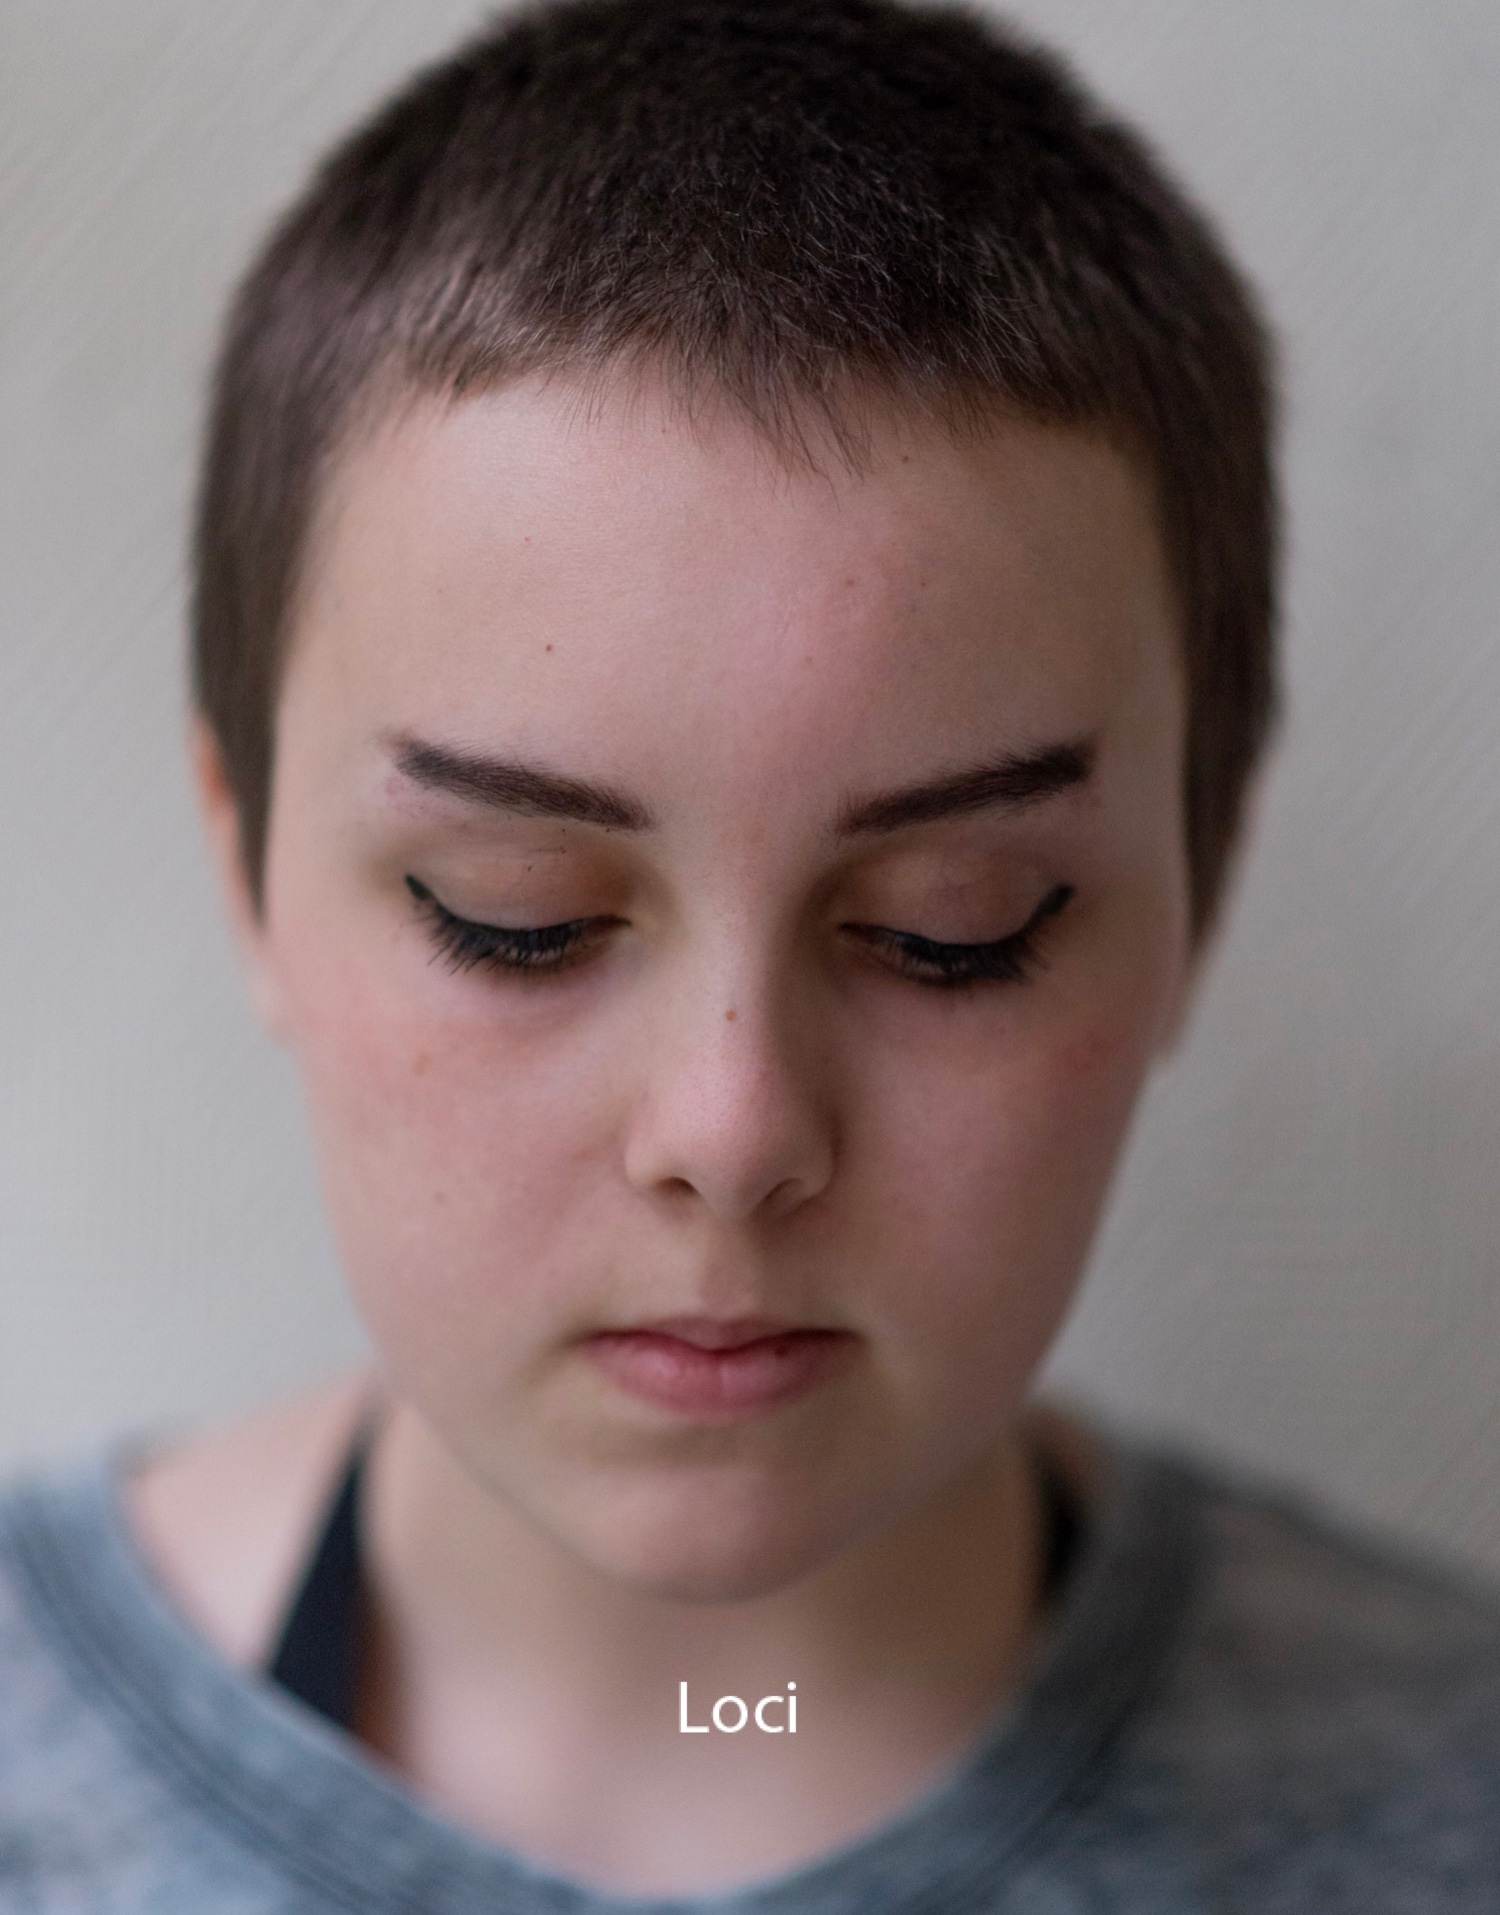 a close-up portrait of a young person looking downward with the title Loci overlaid